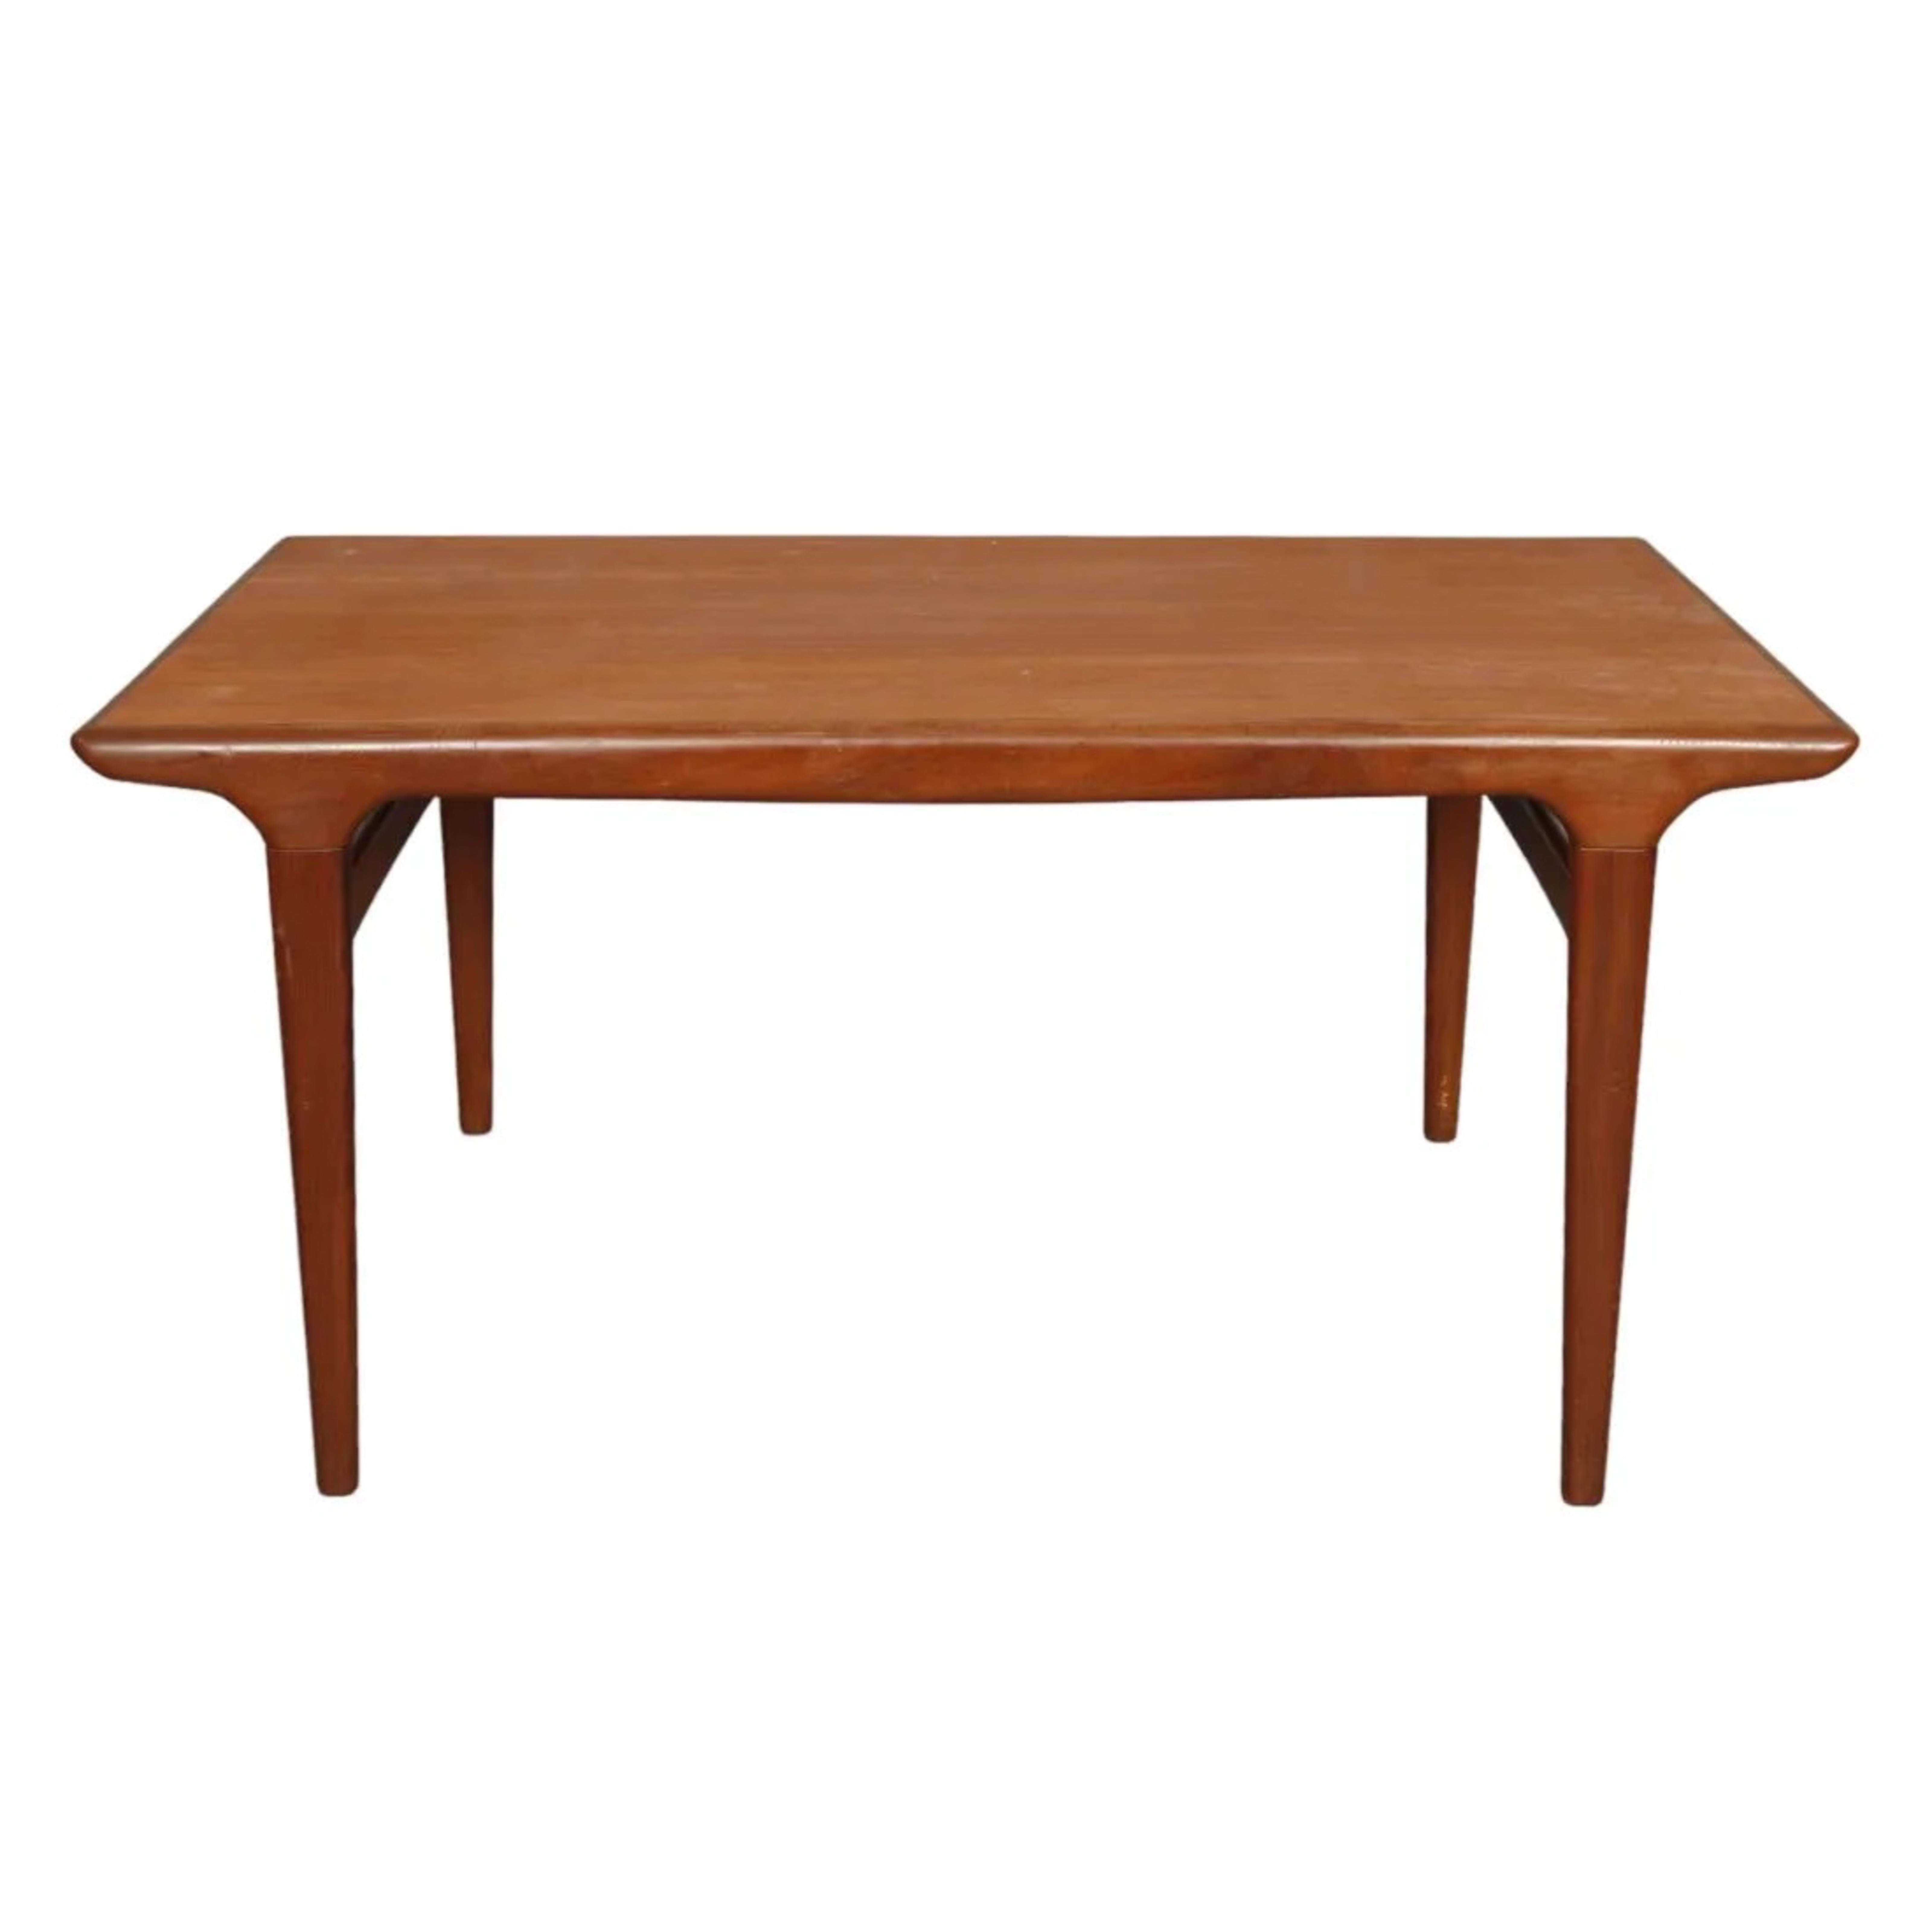 Mid-Century Teak Dinning table with inner leave  1950s

Dimensions:
L60 x D33 X H28.8 in + 36 in extend trim 
2.5 in drop can fit an arm dining chair with 25 in arms height under


Condition:
very good considering age and use  
sturdy and heavy